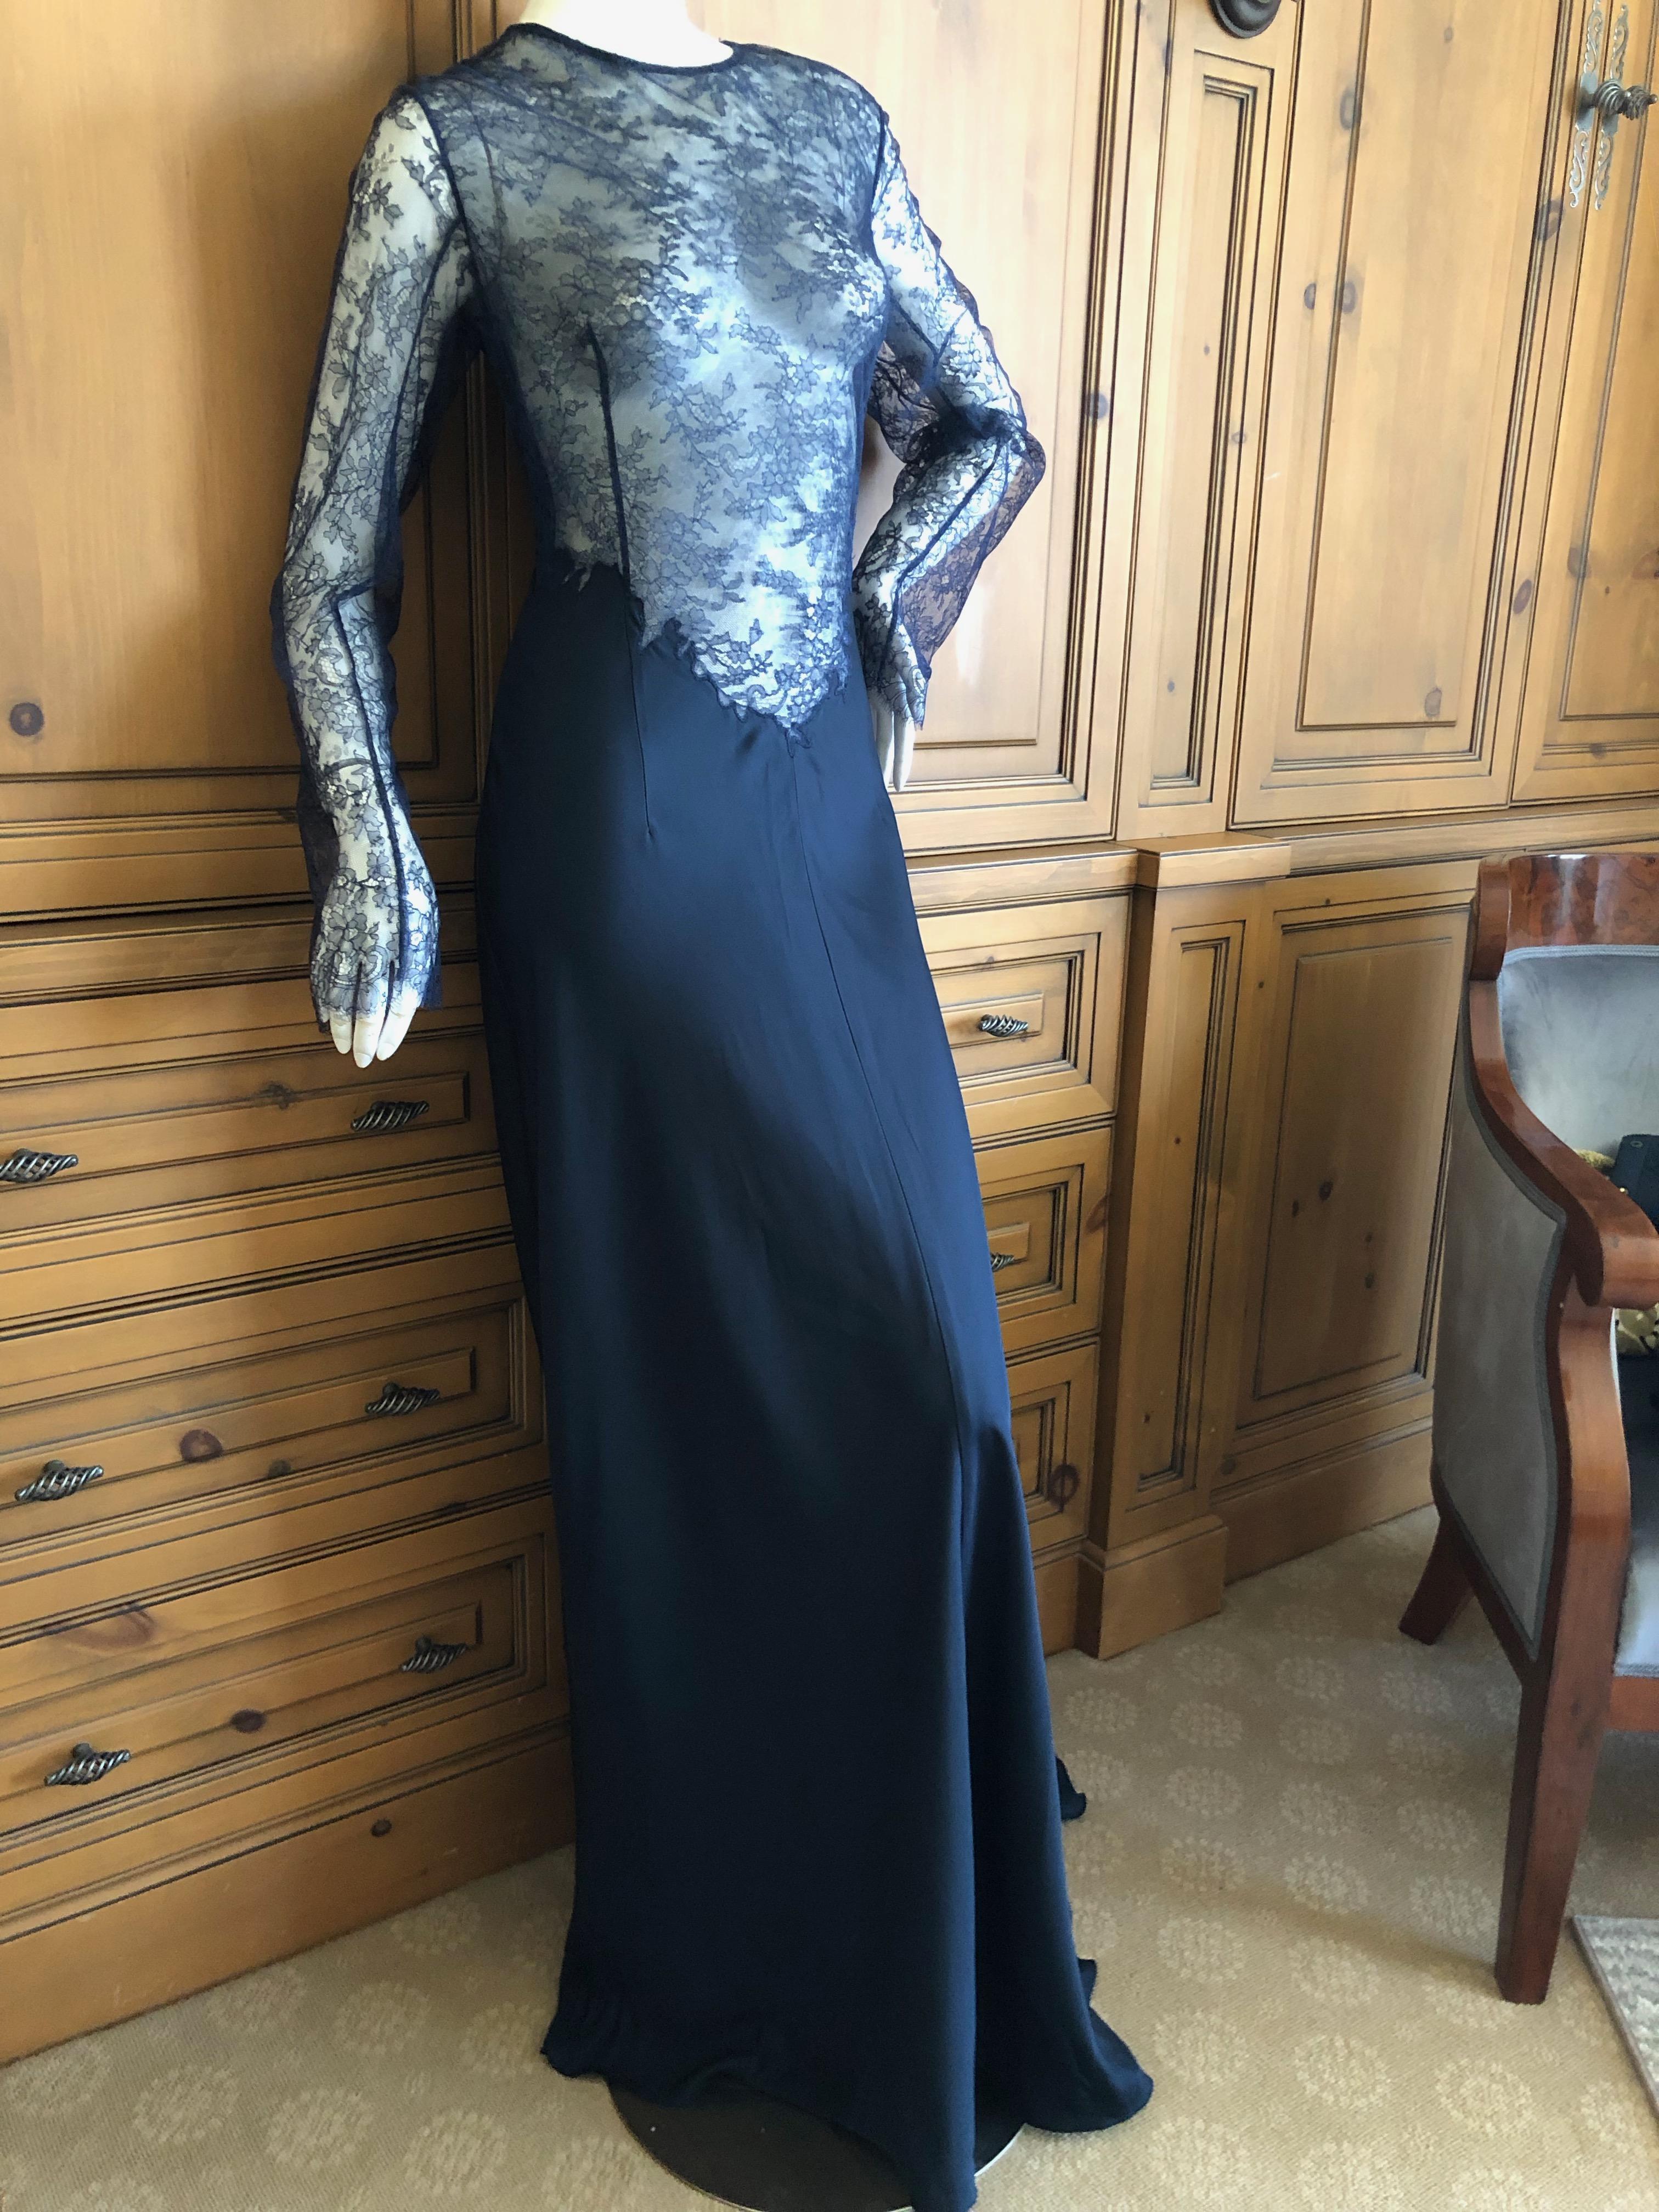 Nina Ricci Exquisite Navy Blue Sheer Lace Evening Dress with Train
By Peter Copping
They were not widely produced , and rarely come up on the market.
Size 40, this runs quite large
 Bust 40